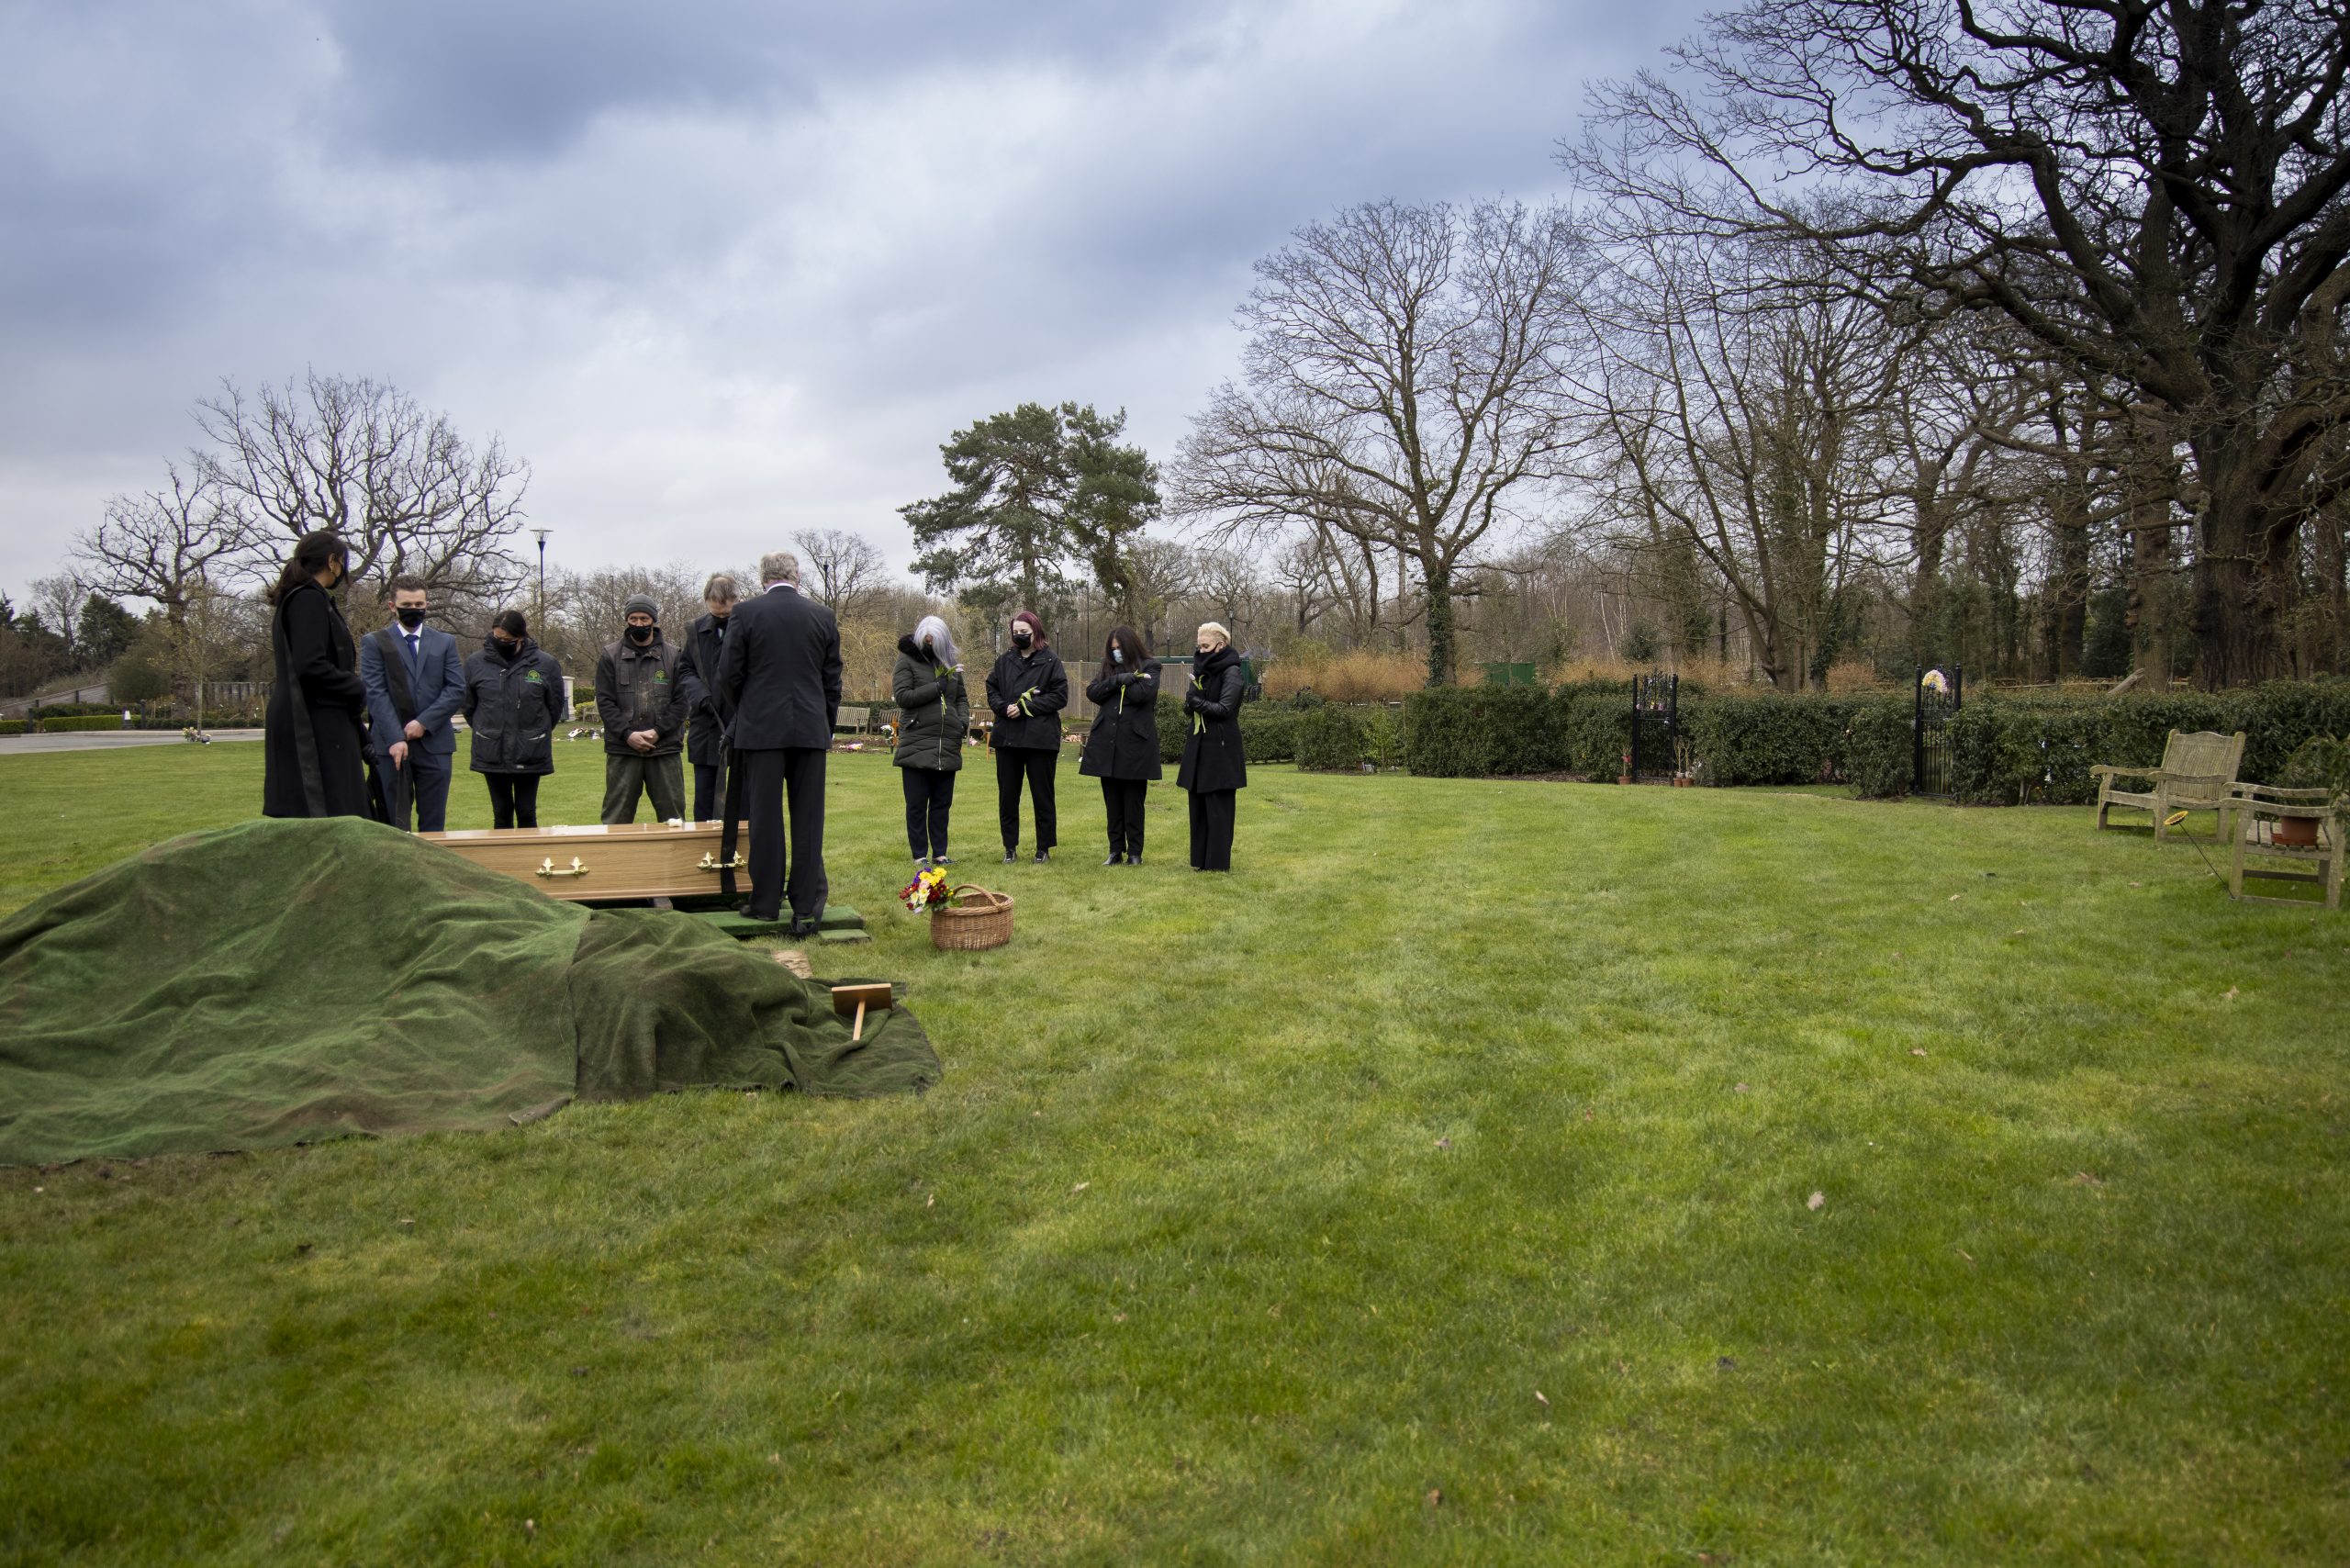 A coffin burial at a GreenAcres Park, frequently chosen by people of different religious and non-religious backgrounds